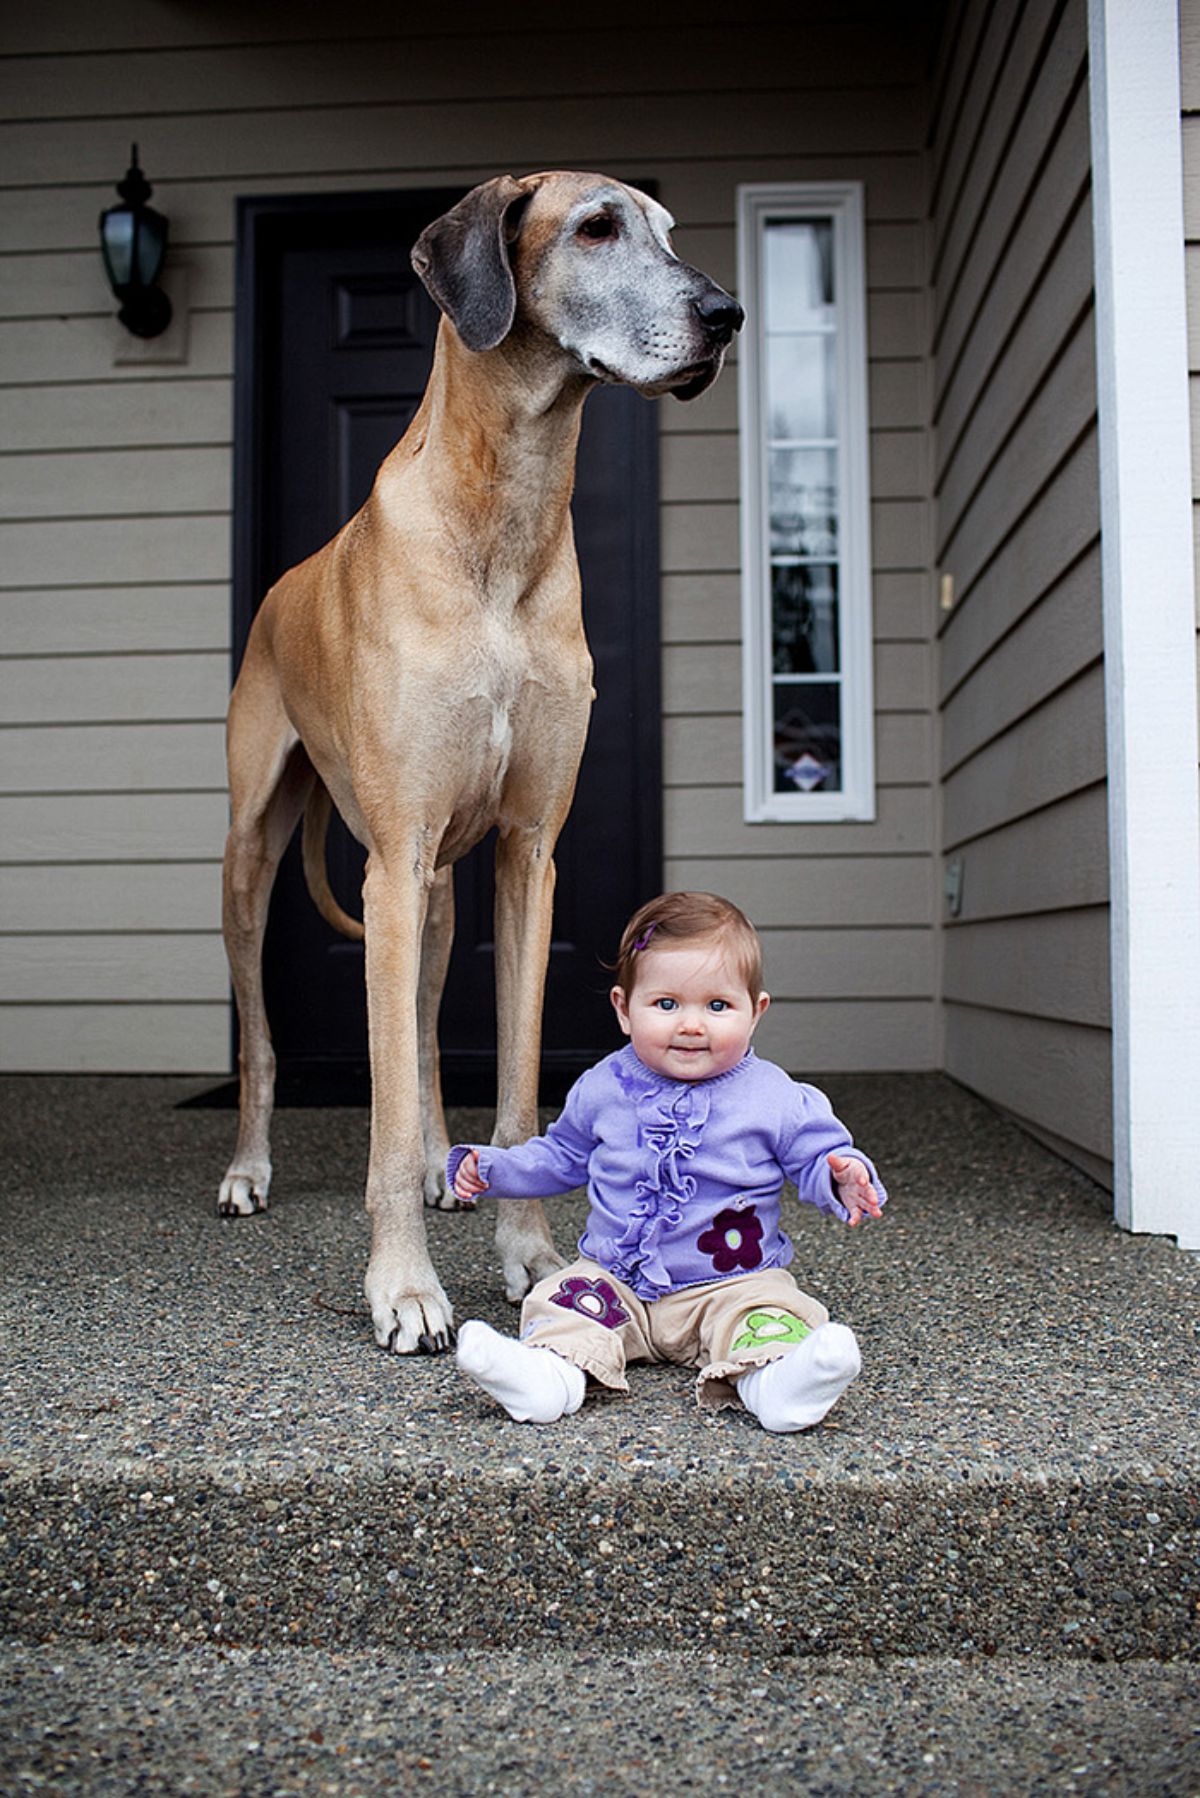 baby sitting on the floor with a brown and white dog standing over the baby